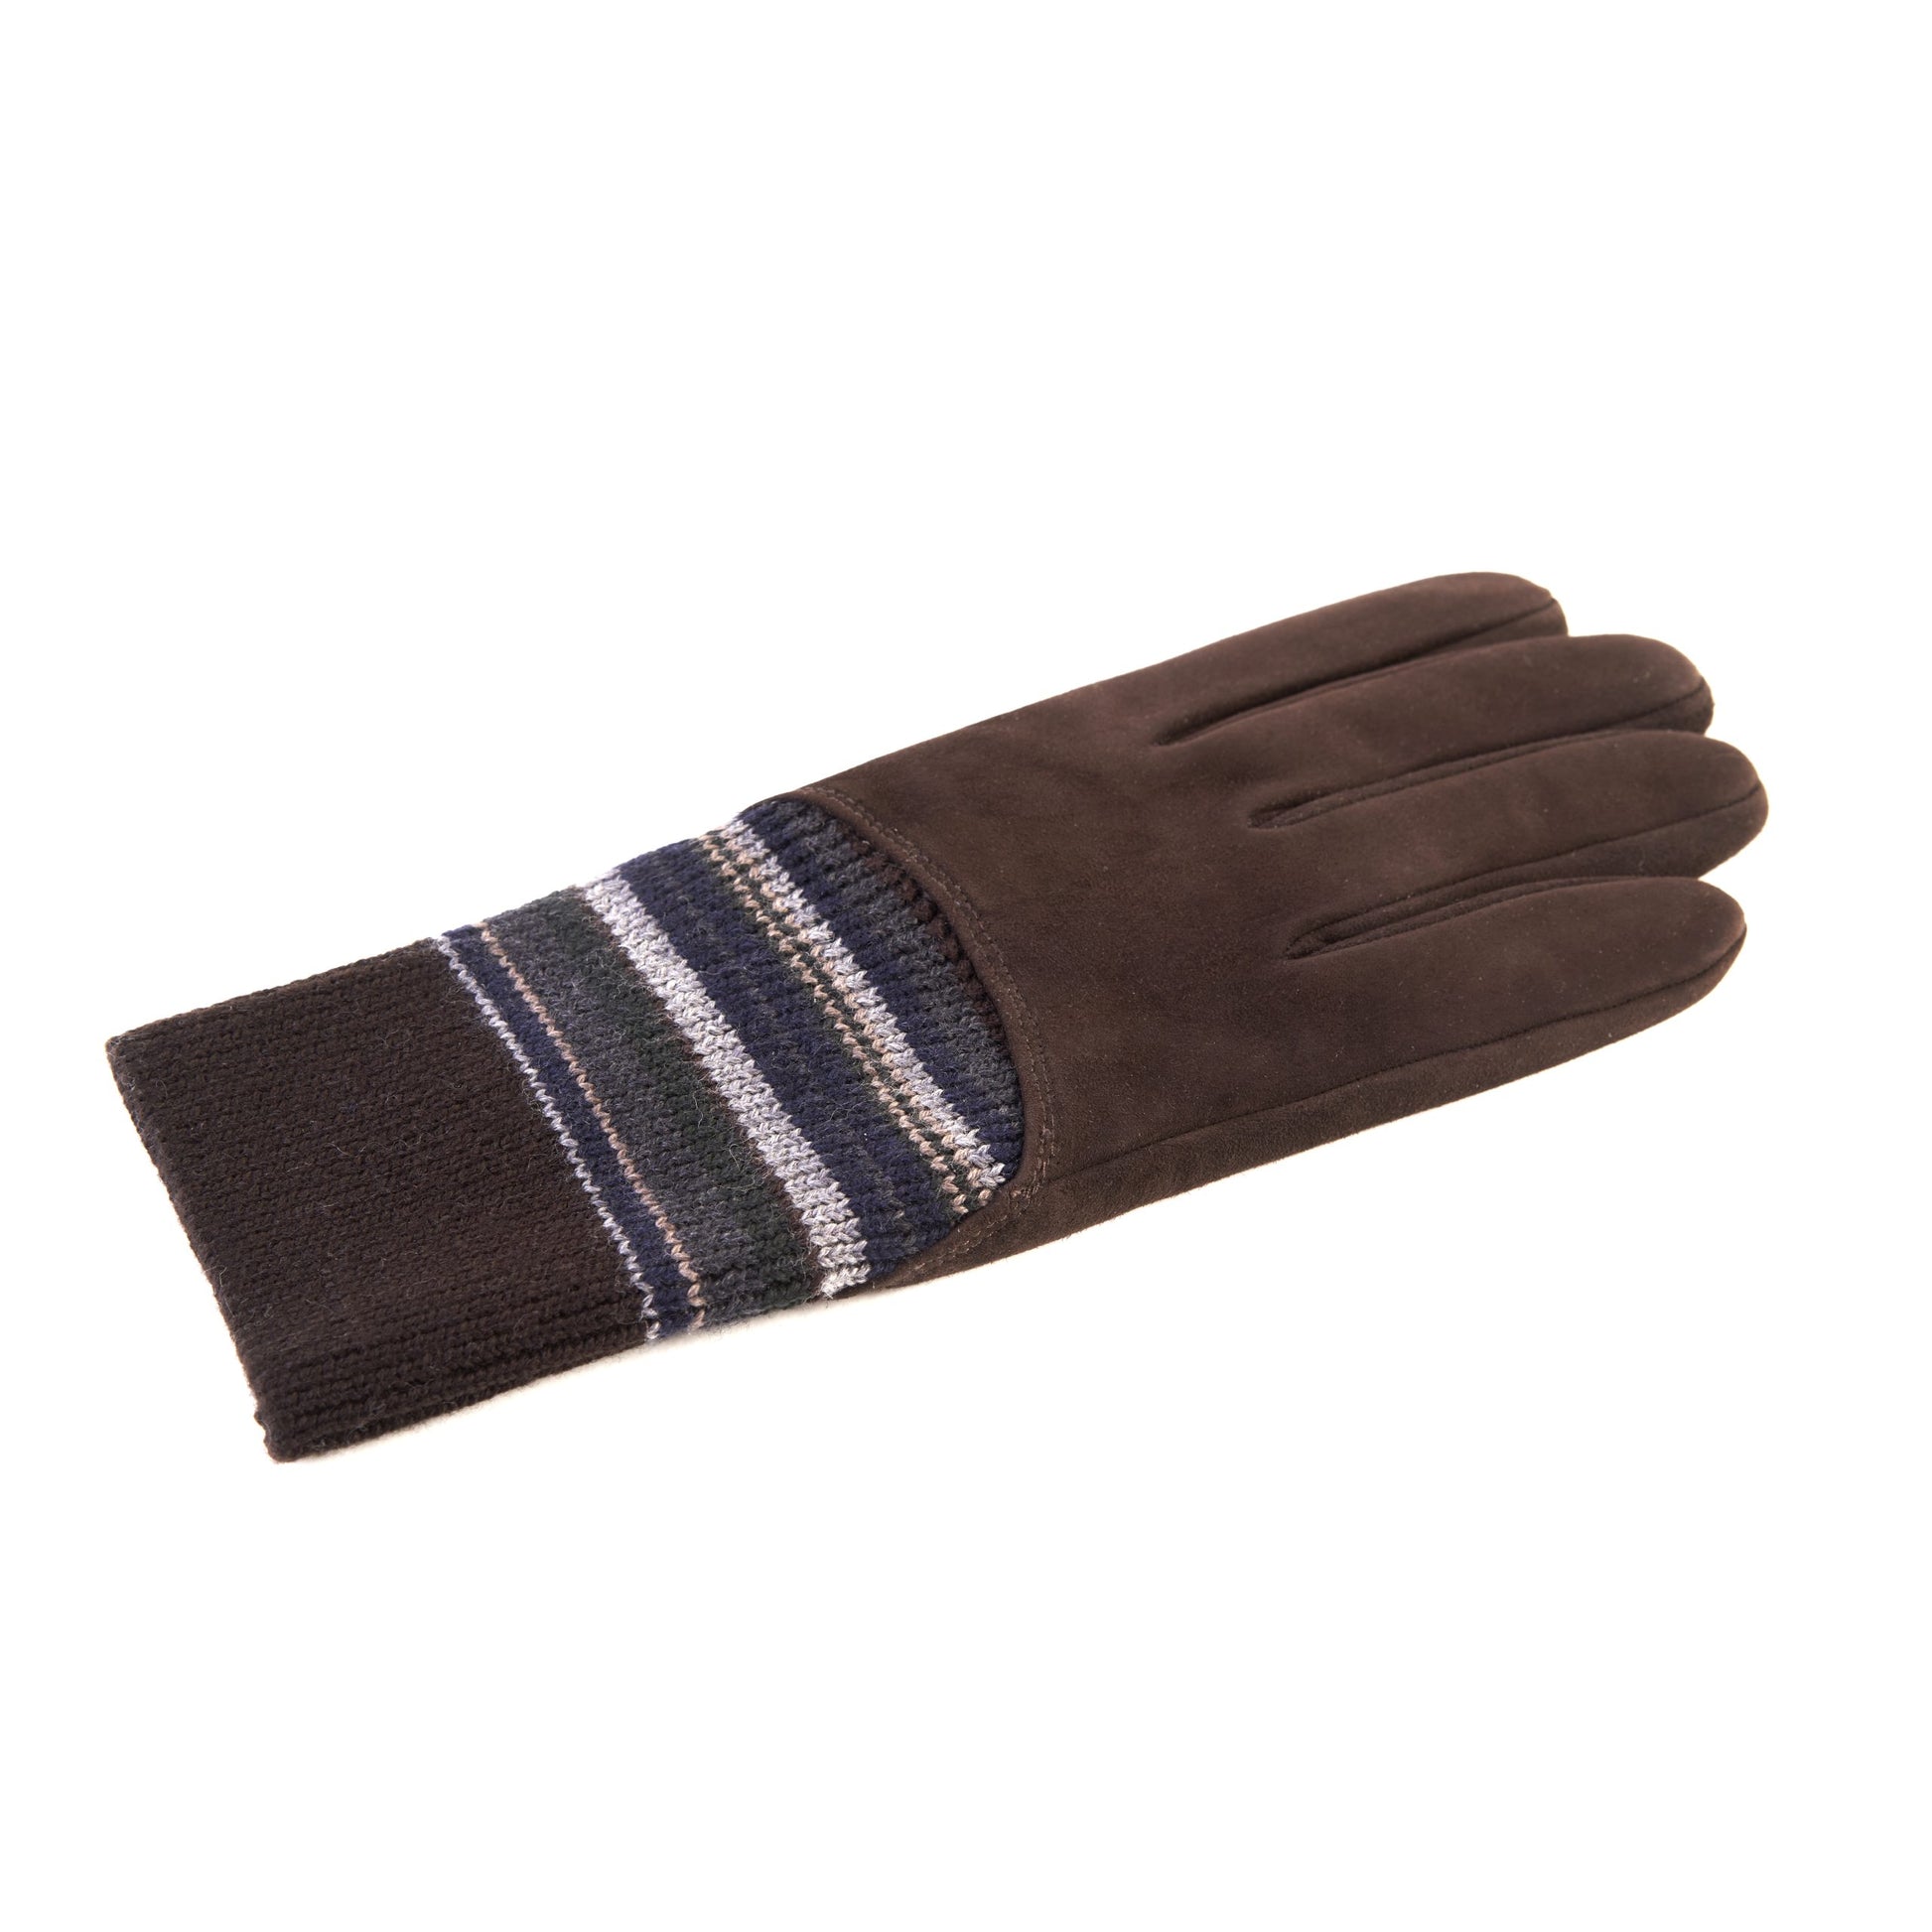 Men's brown suede leather gloves with cashmere lining and wool cuff